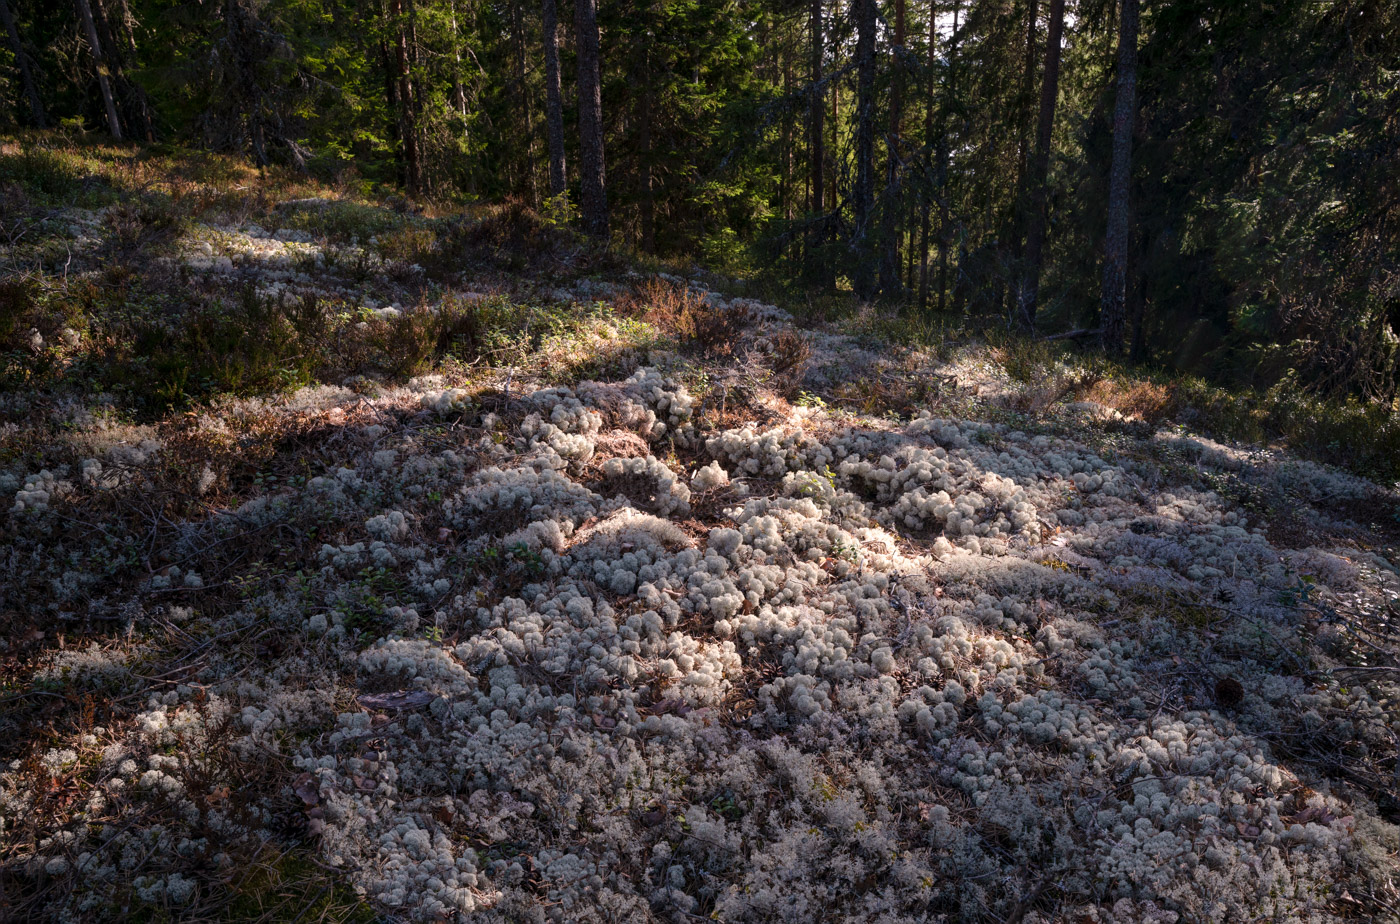 An expanse of white lichens on the ground of the old forest of Salboknös